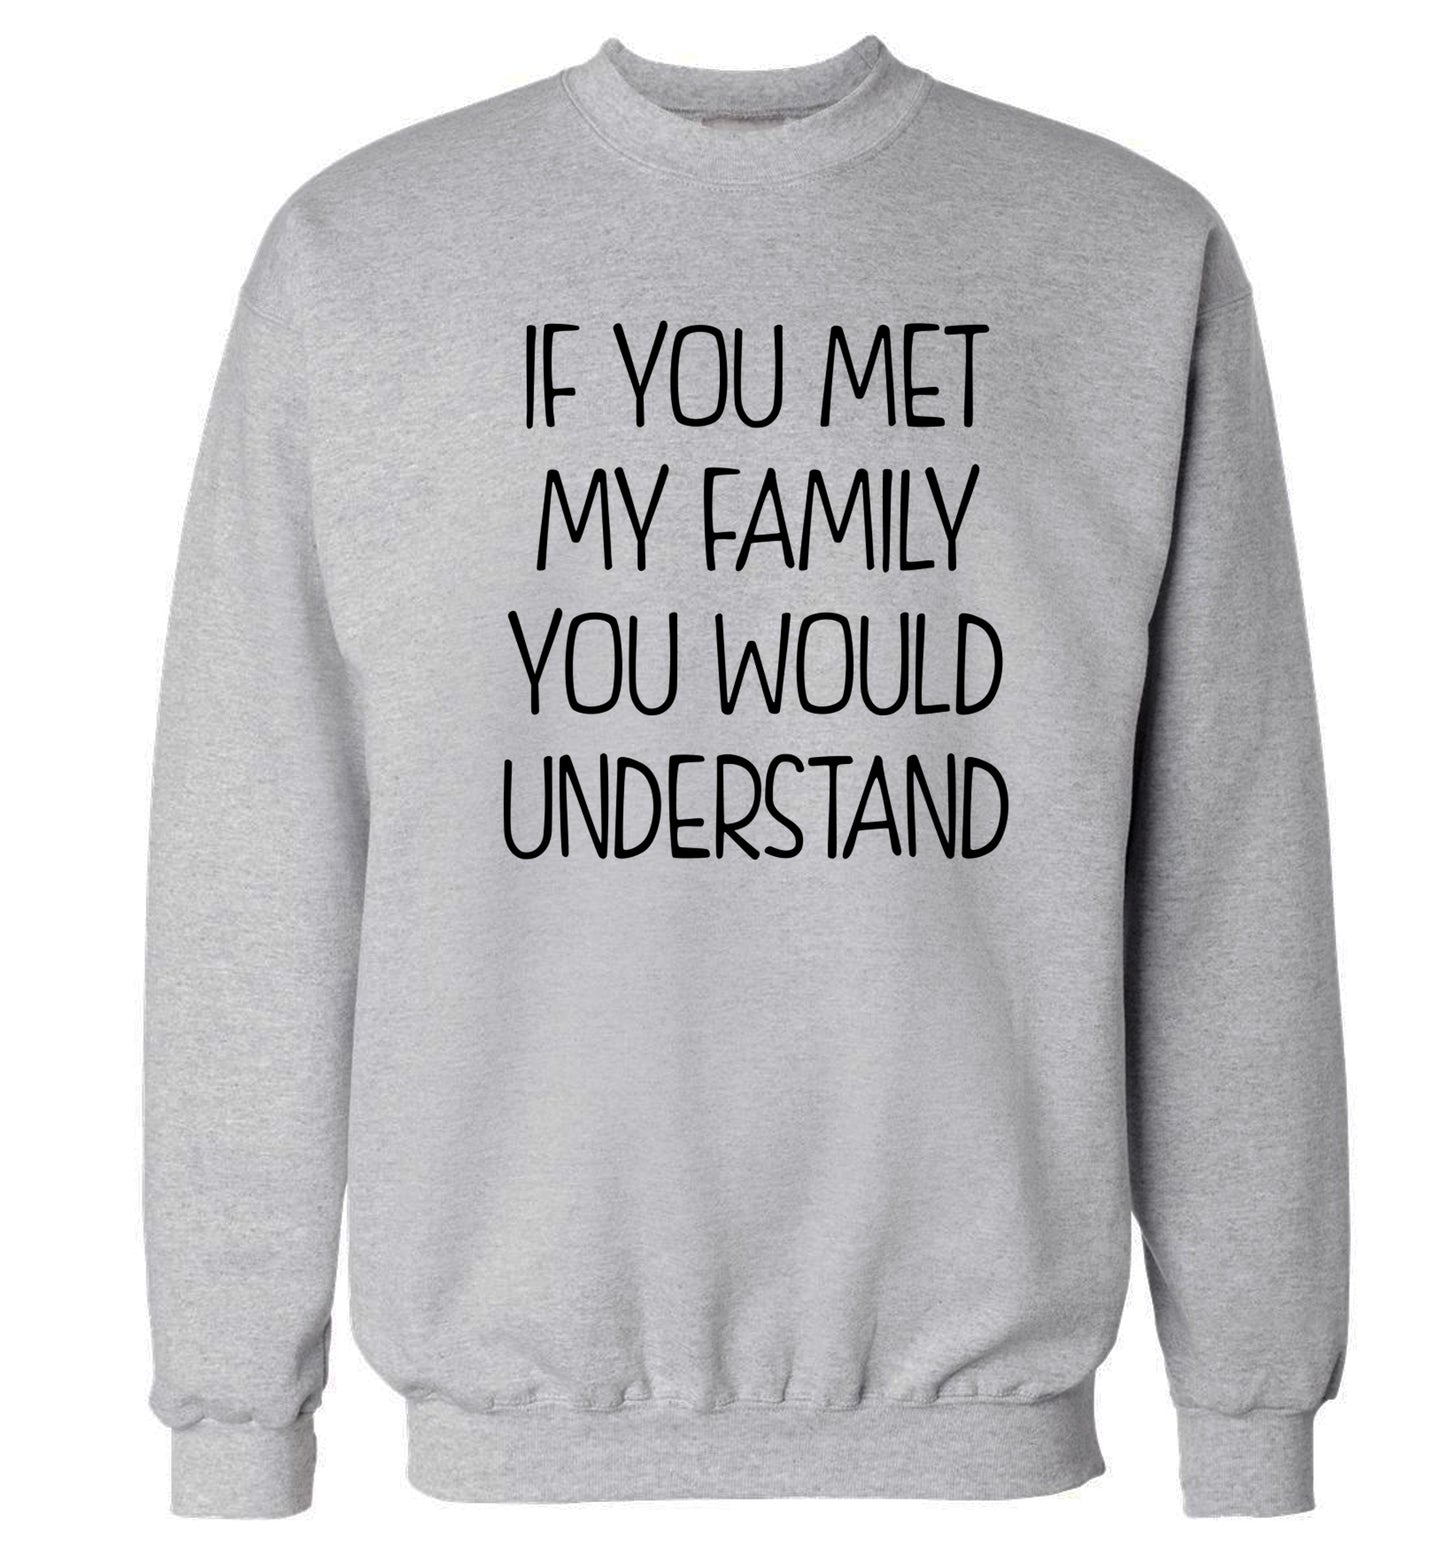 If you met my family you would understand Adult's unisex grey Sweater 2XL